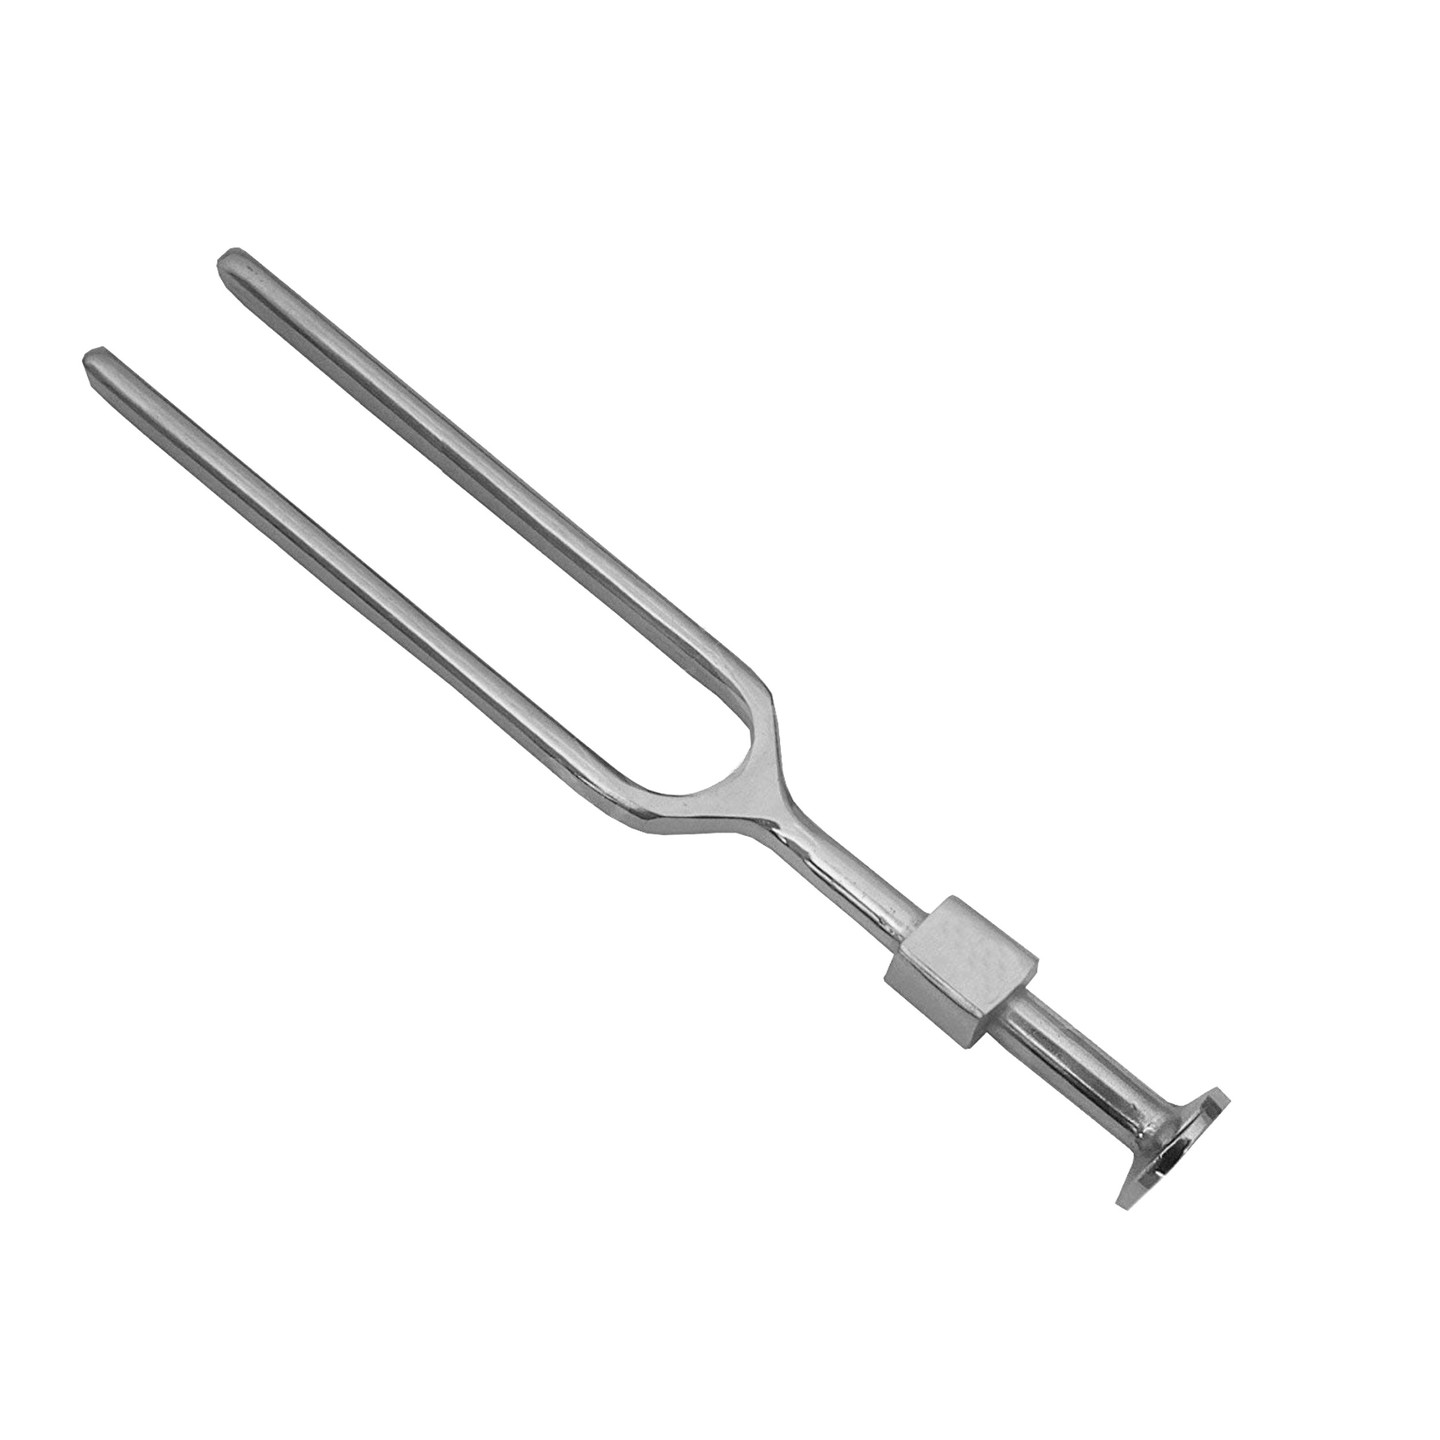 Vkare Stainless Steel Tuning Fork - 512MHz